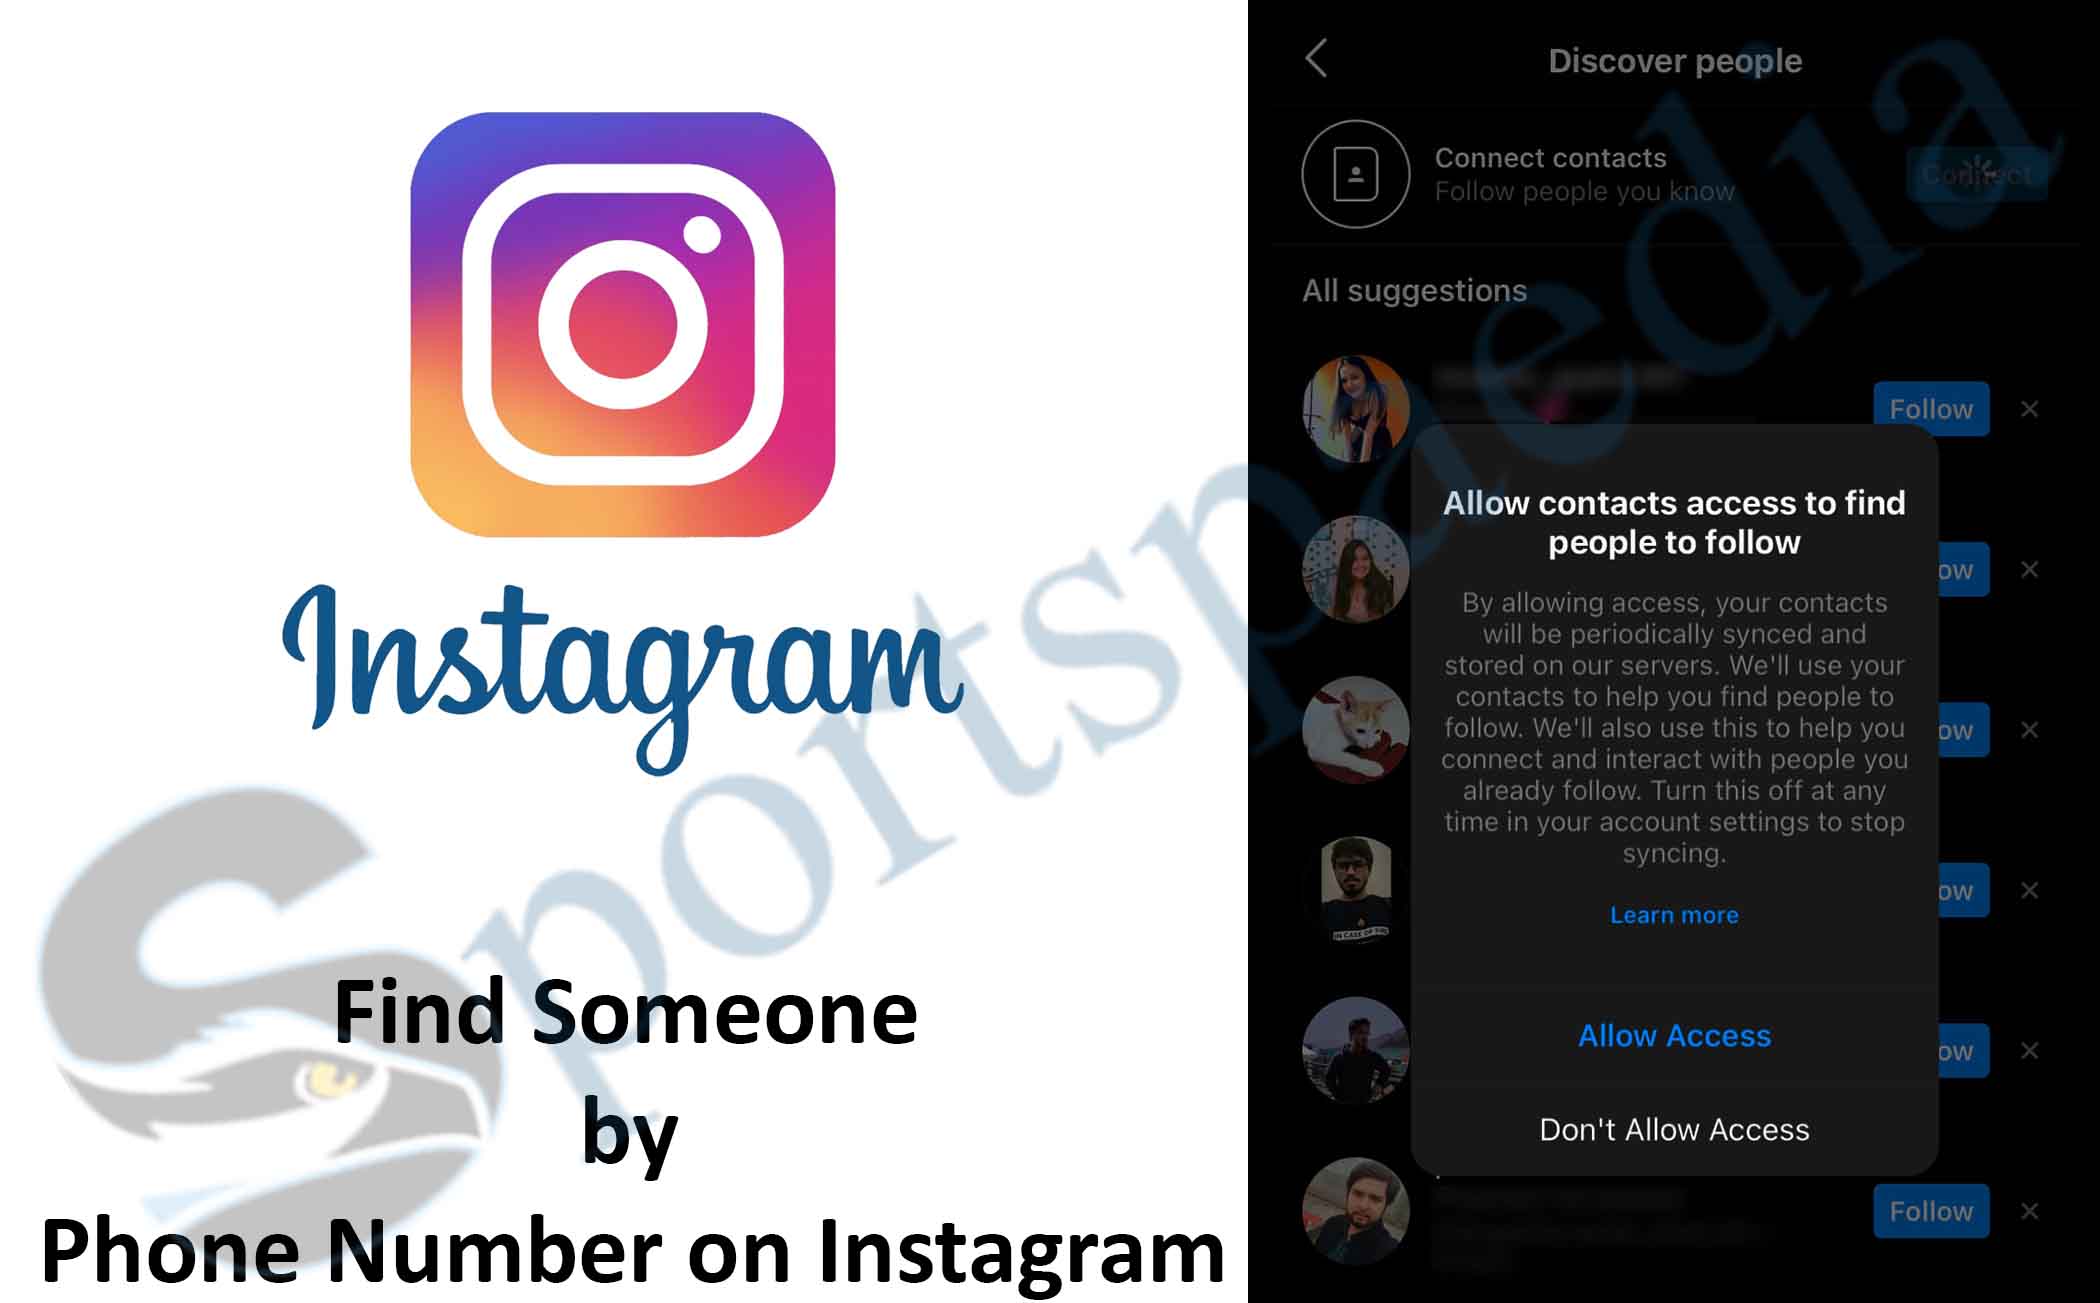 How to Find Someone by Phone Number on Instagram